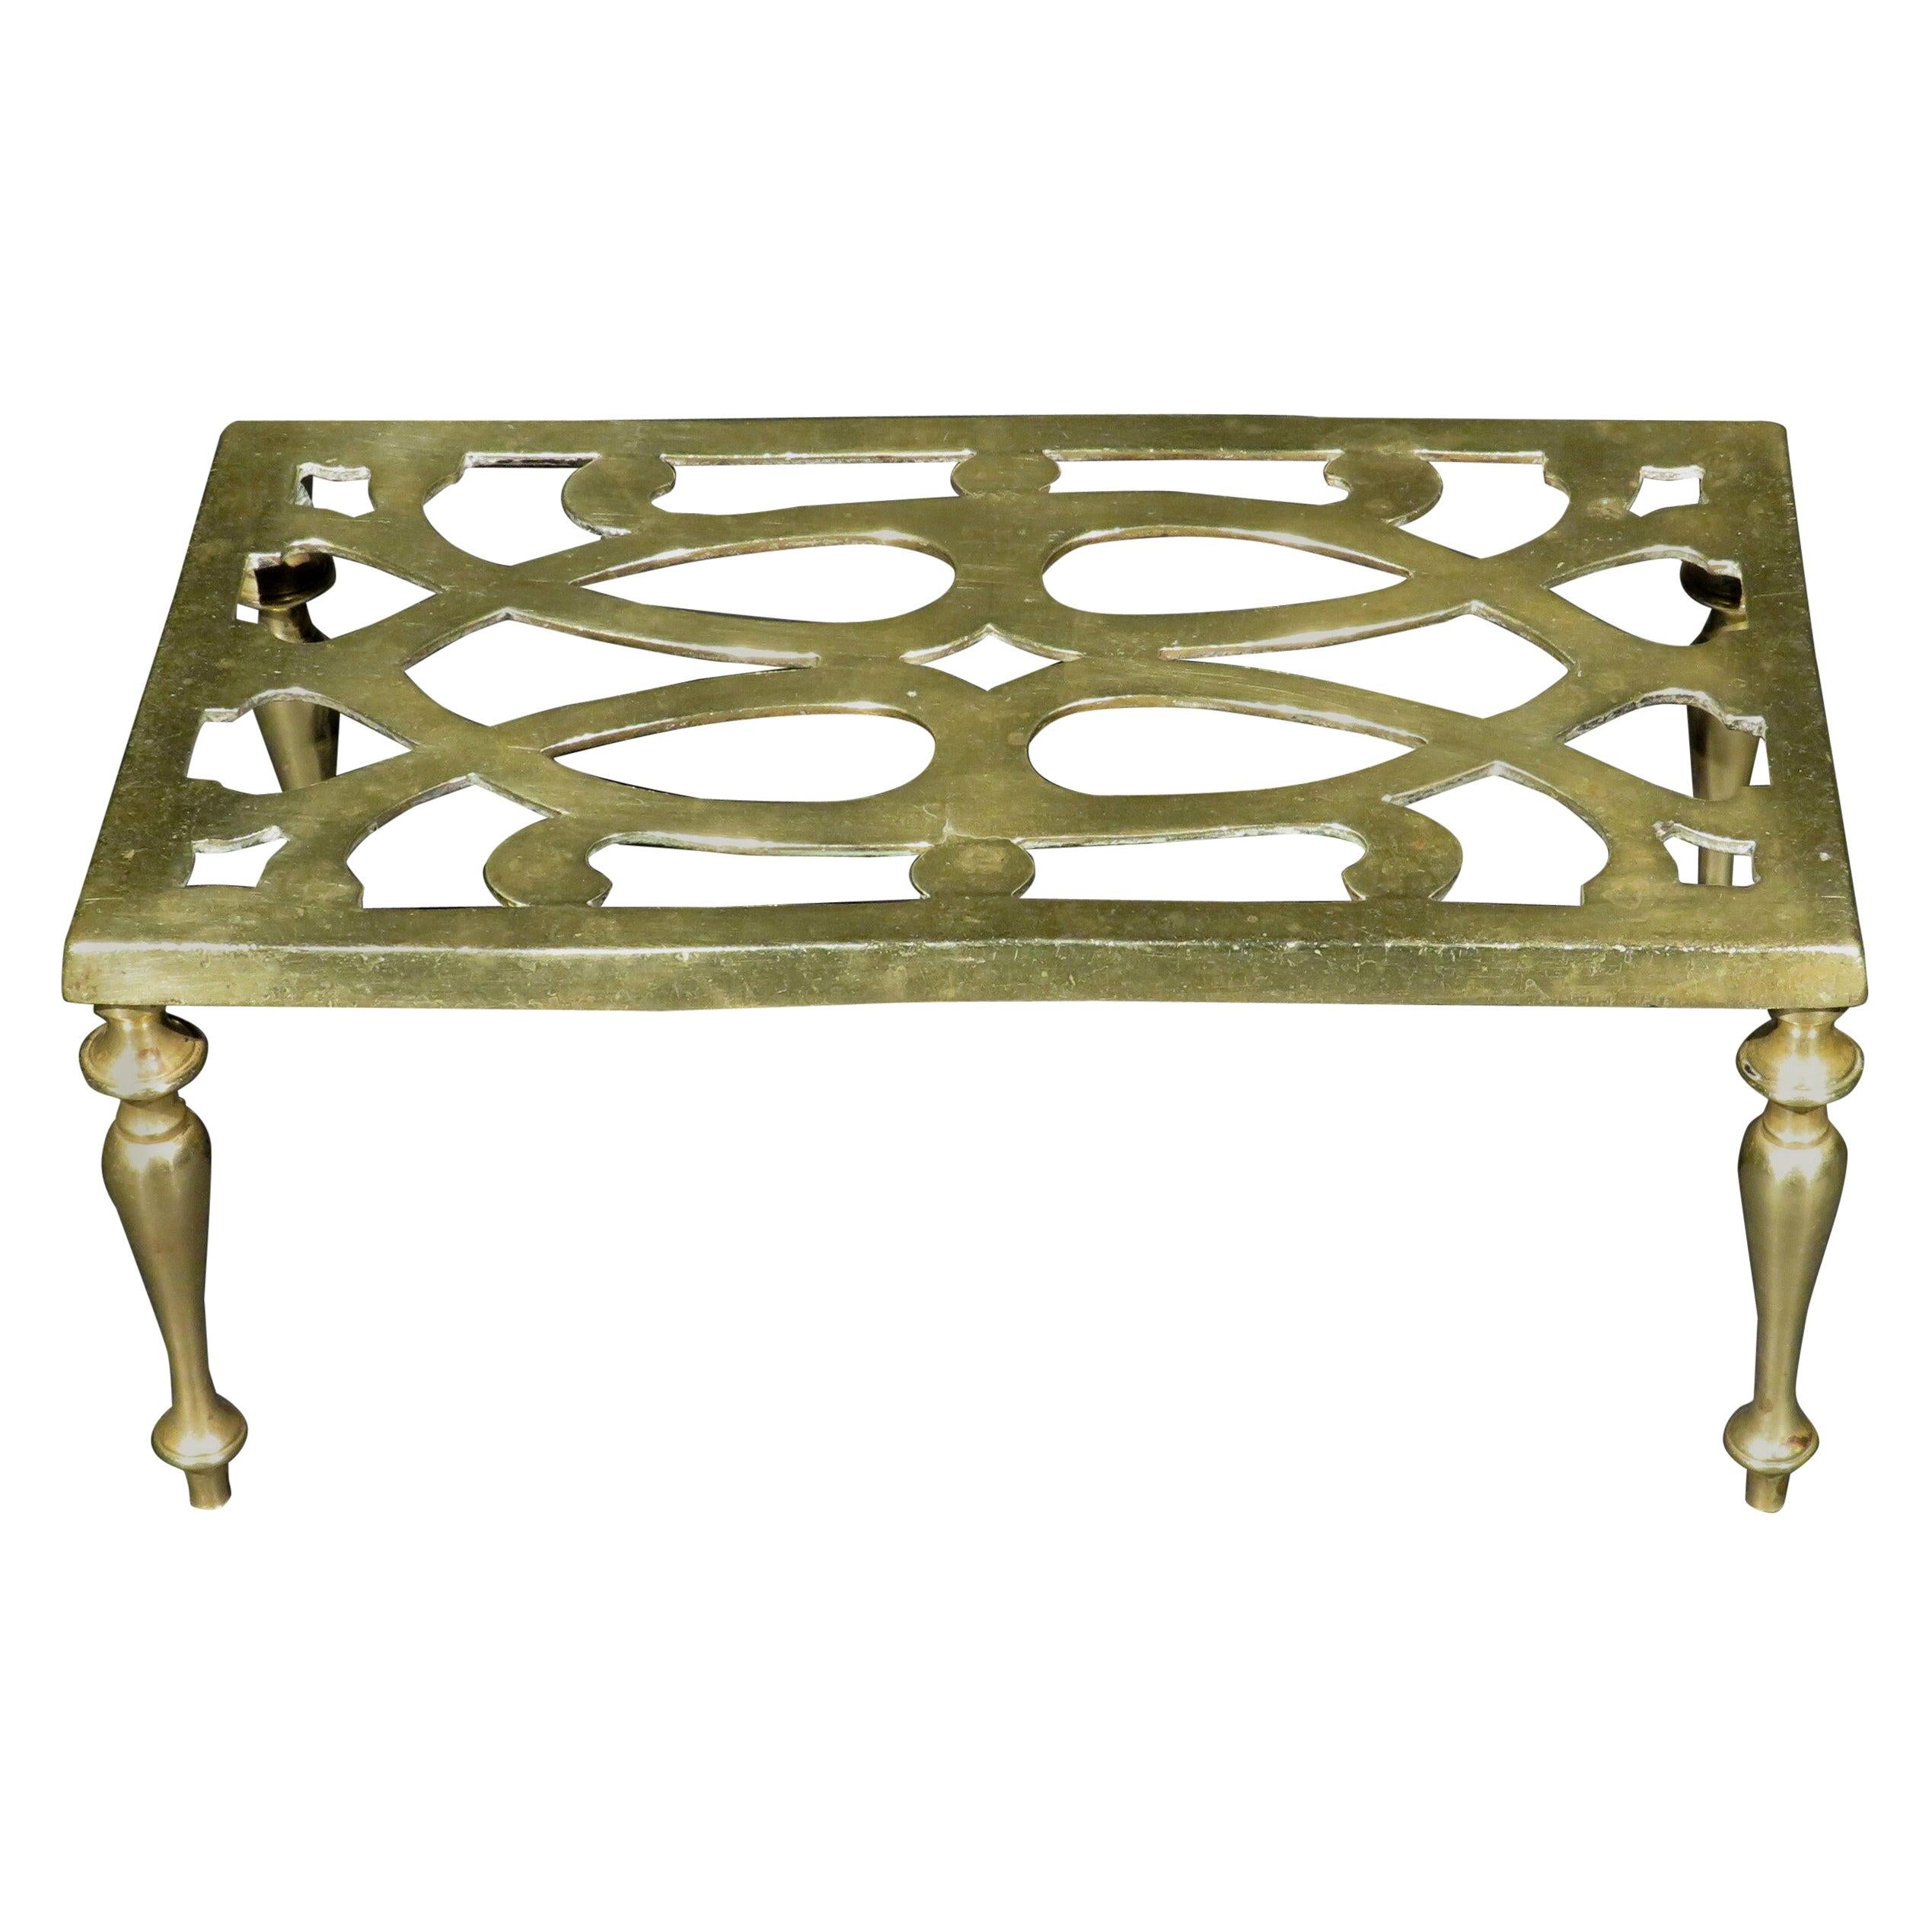 Early 20th Century Table Shaped Brass Trivet, England circa 1900 For Sale